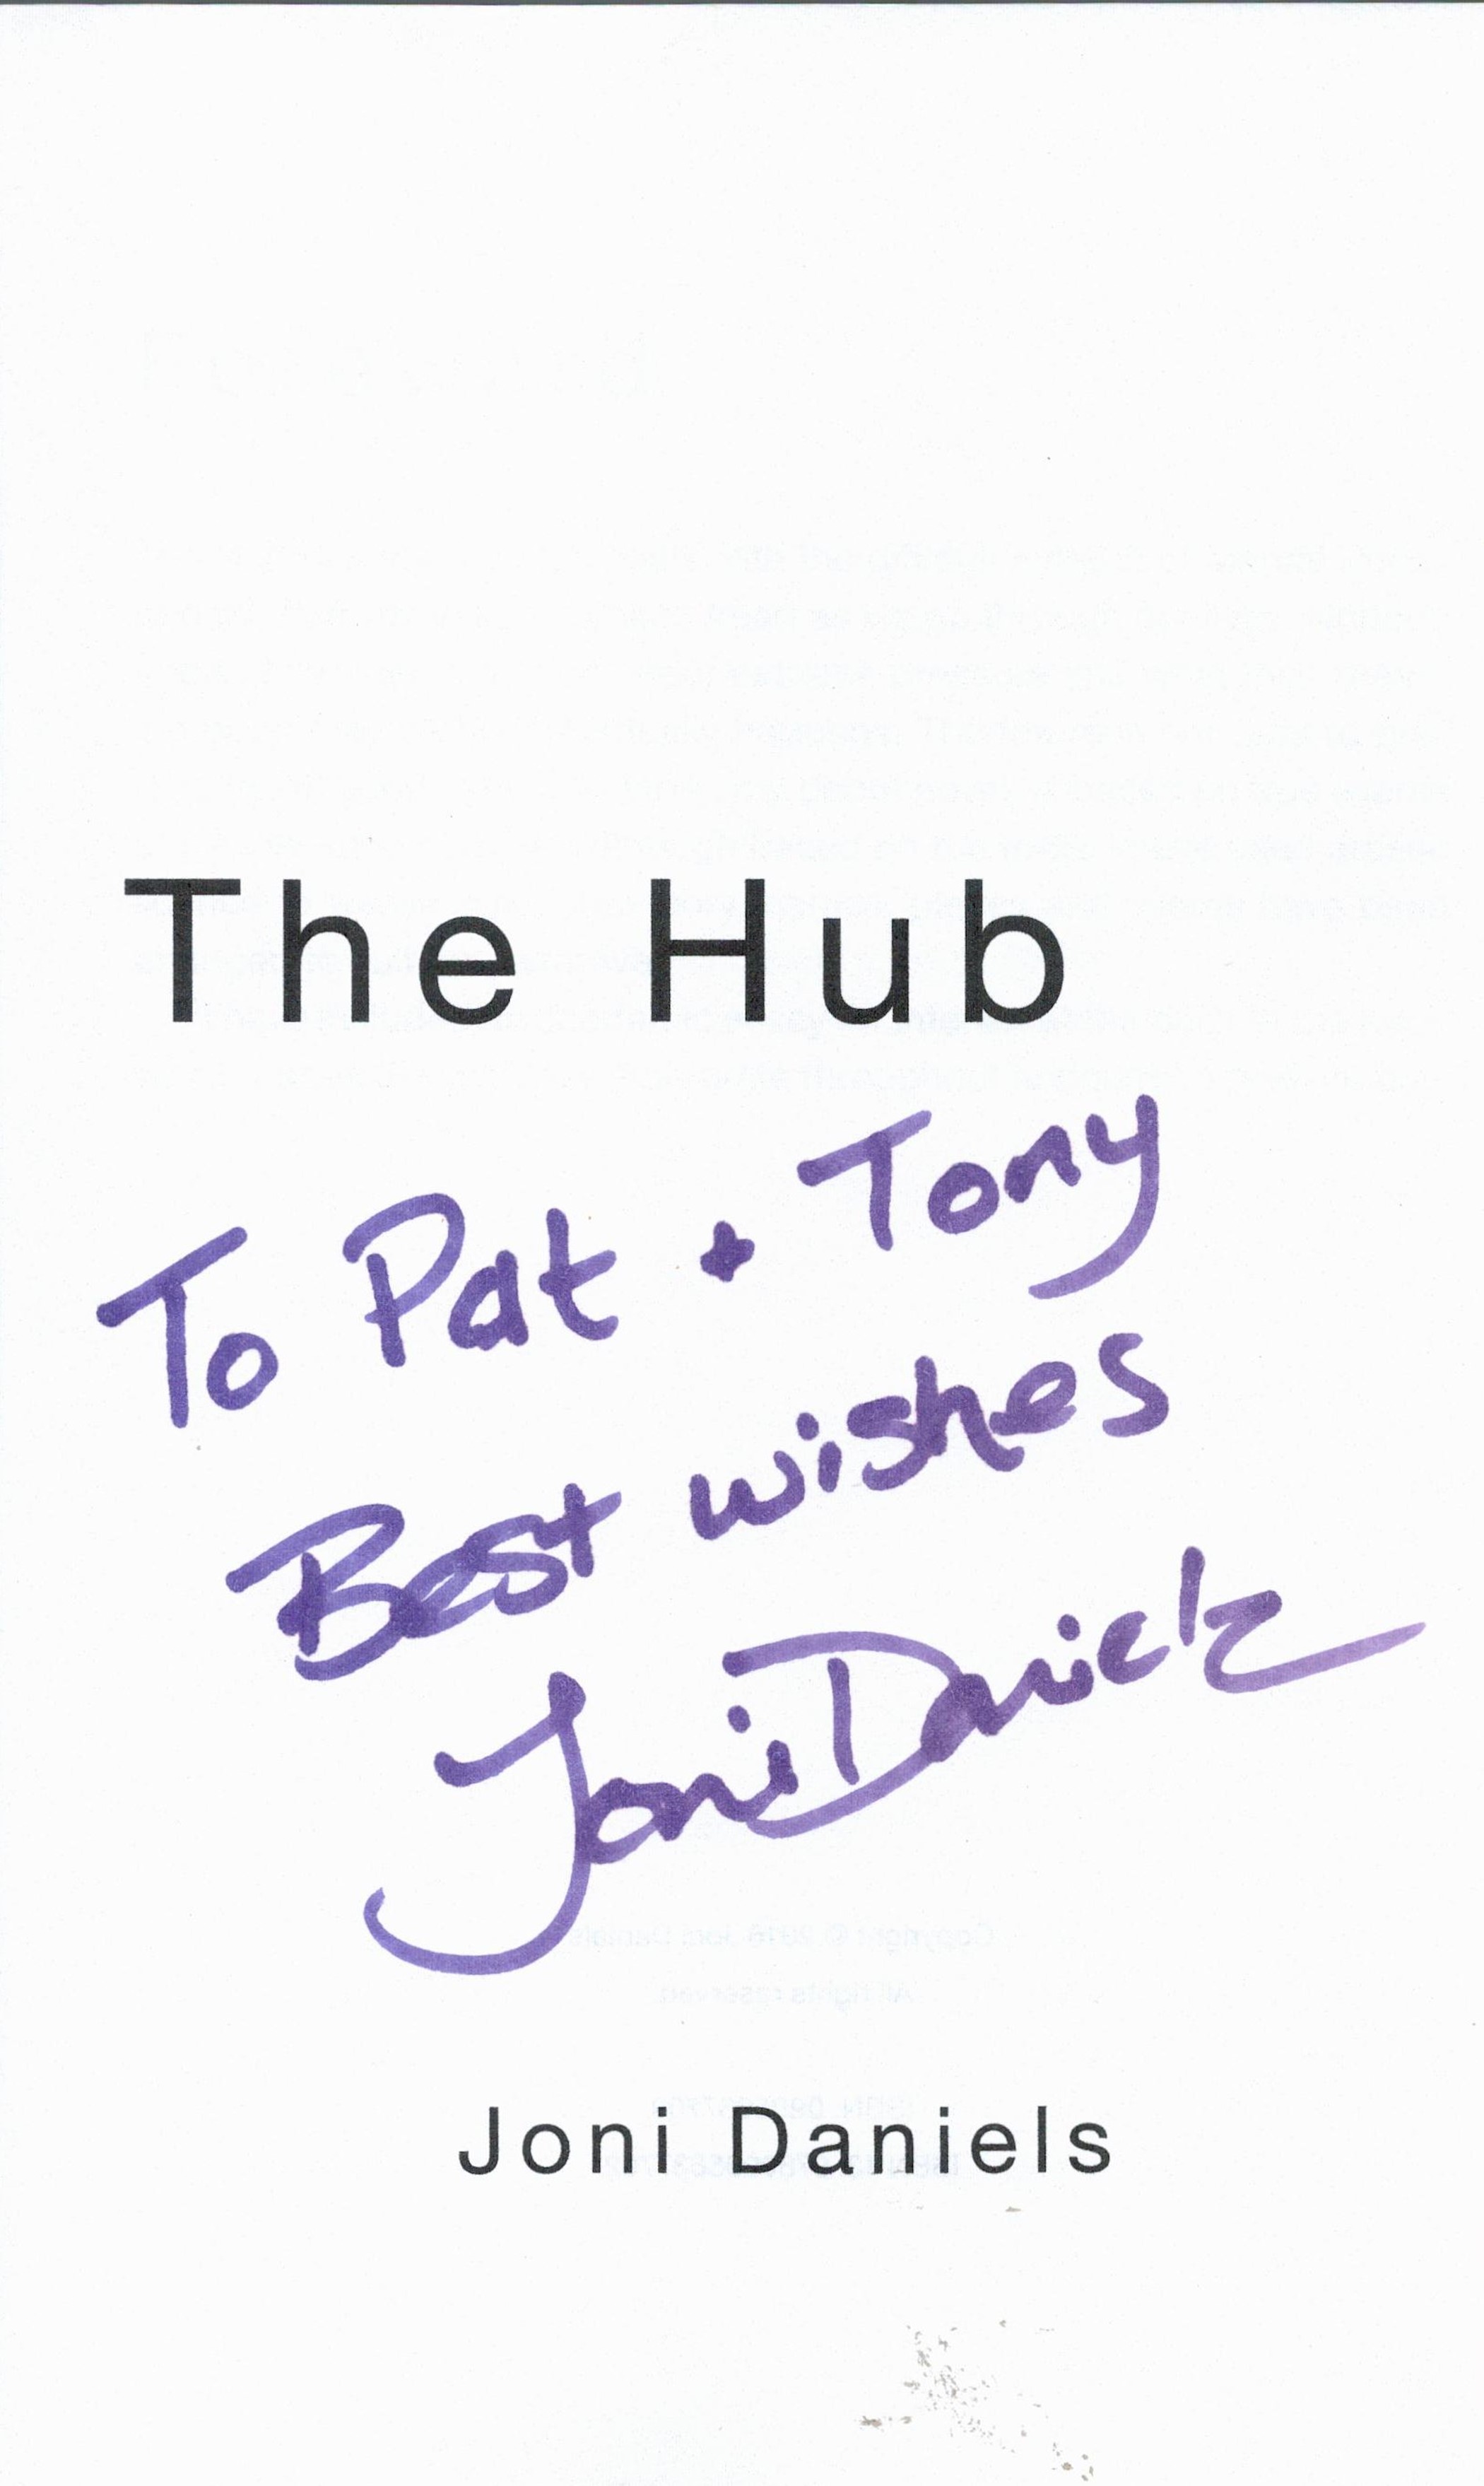 Signed Book Joni Daniels The Hub First Edition 2016 Softback Book Signed by Joni Daniels on the - Image 2 of 4